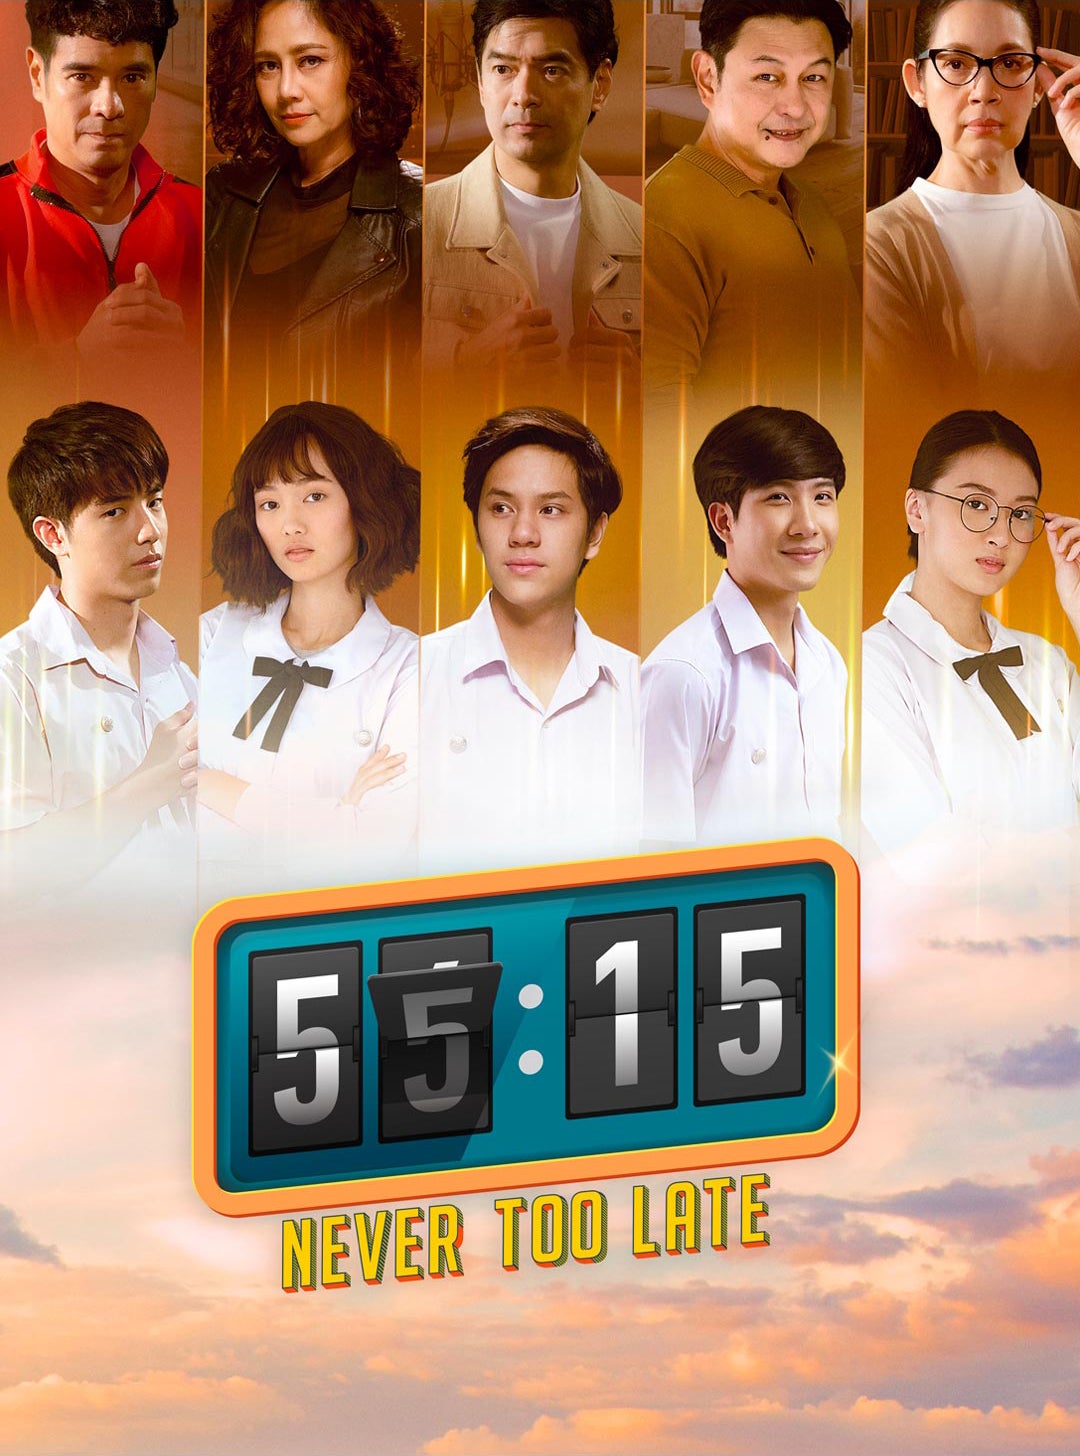 TV ratings for 55:15 Never Too Late in Colombia. Disney+ TV series